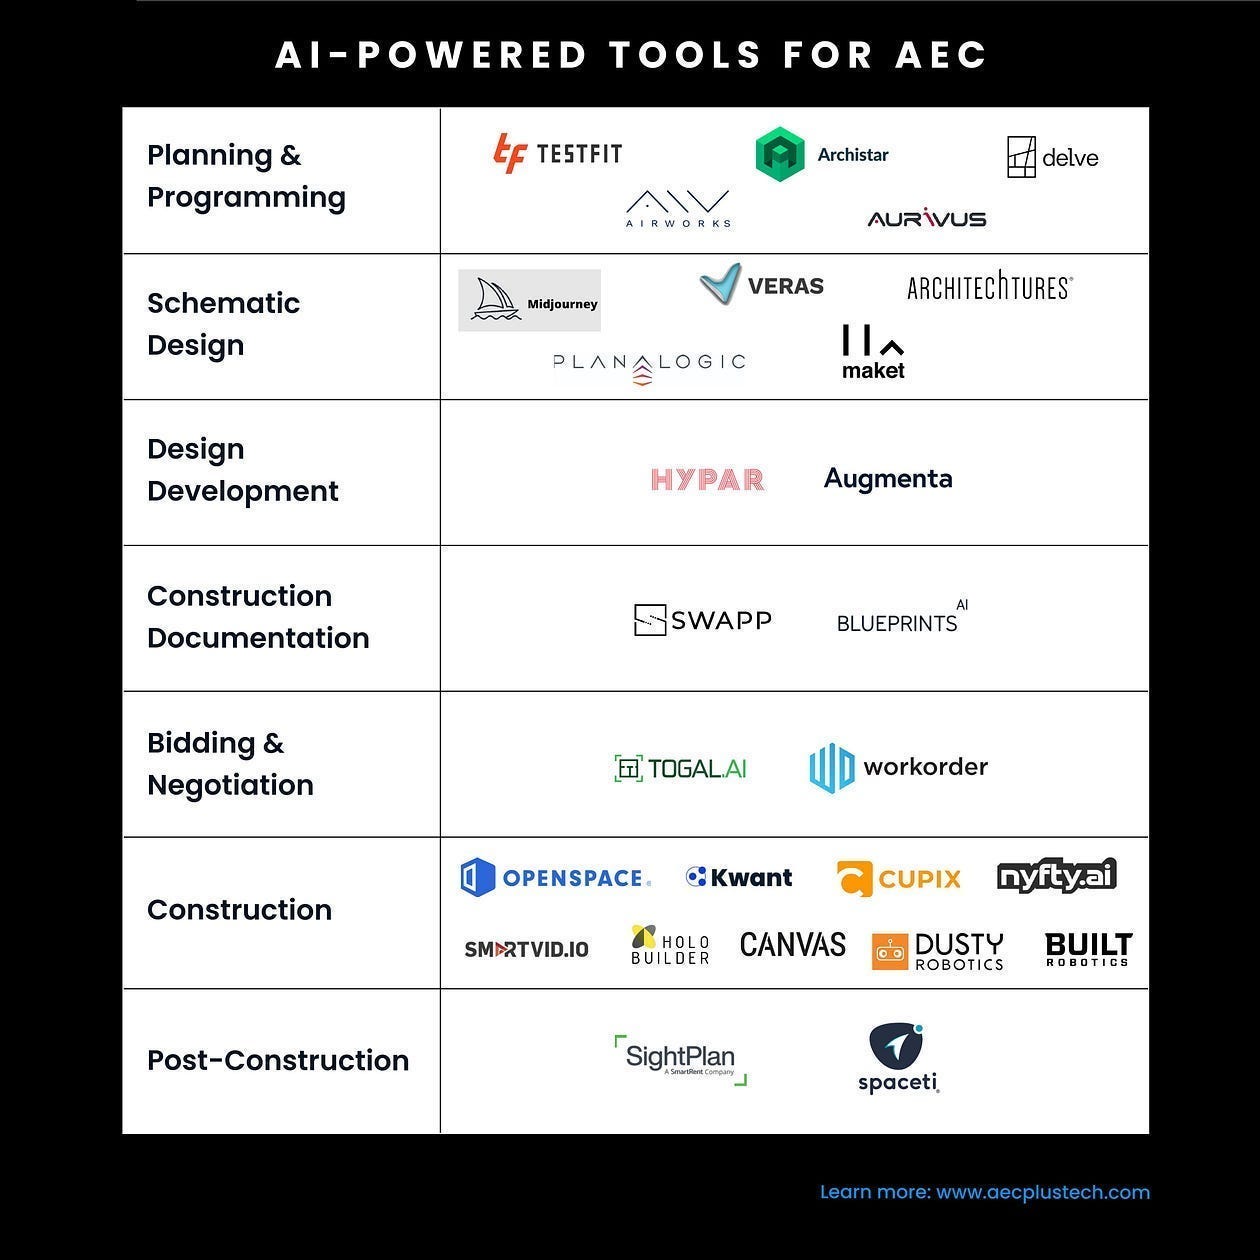 Top AI-Powered Tools for the Building Industry